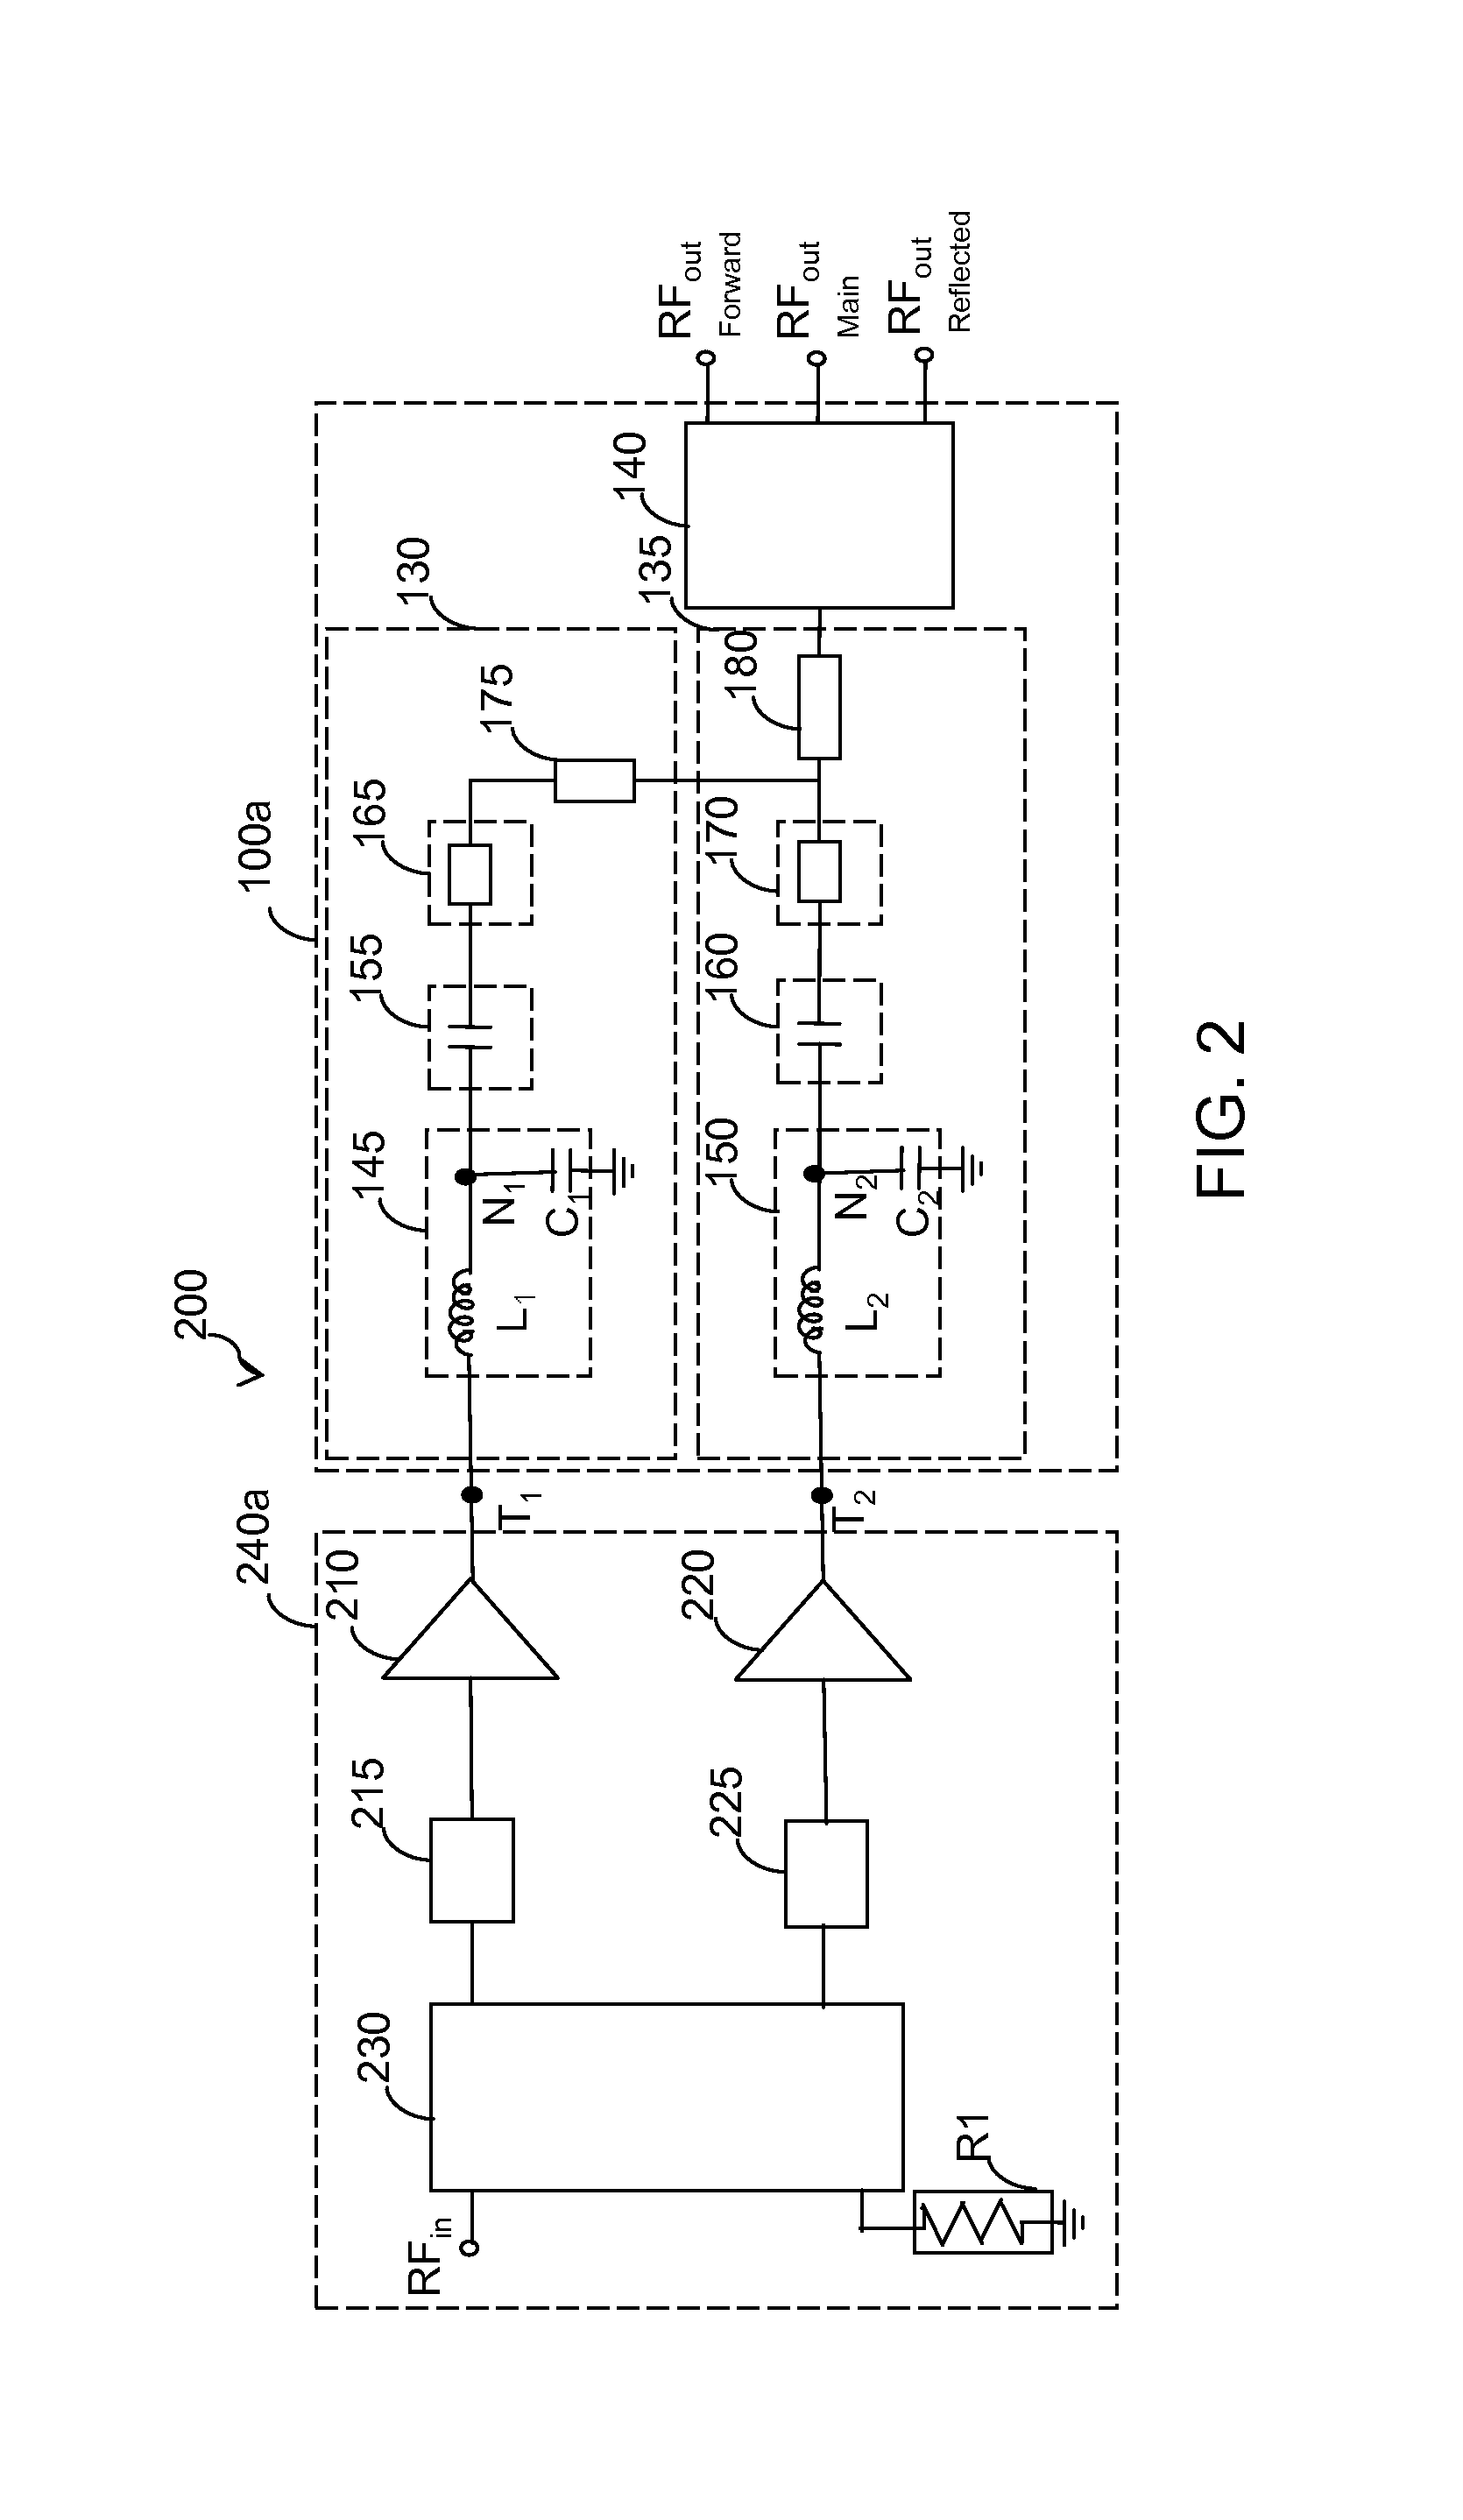 Integrated output combiner for amplifier system